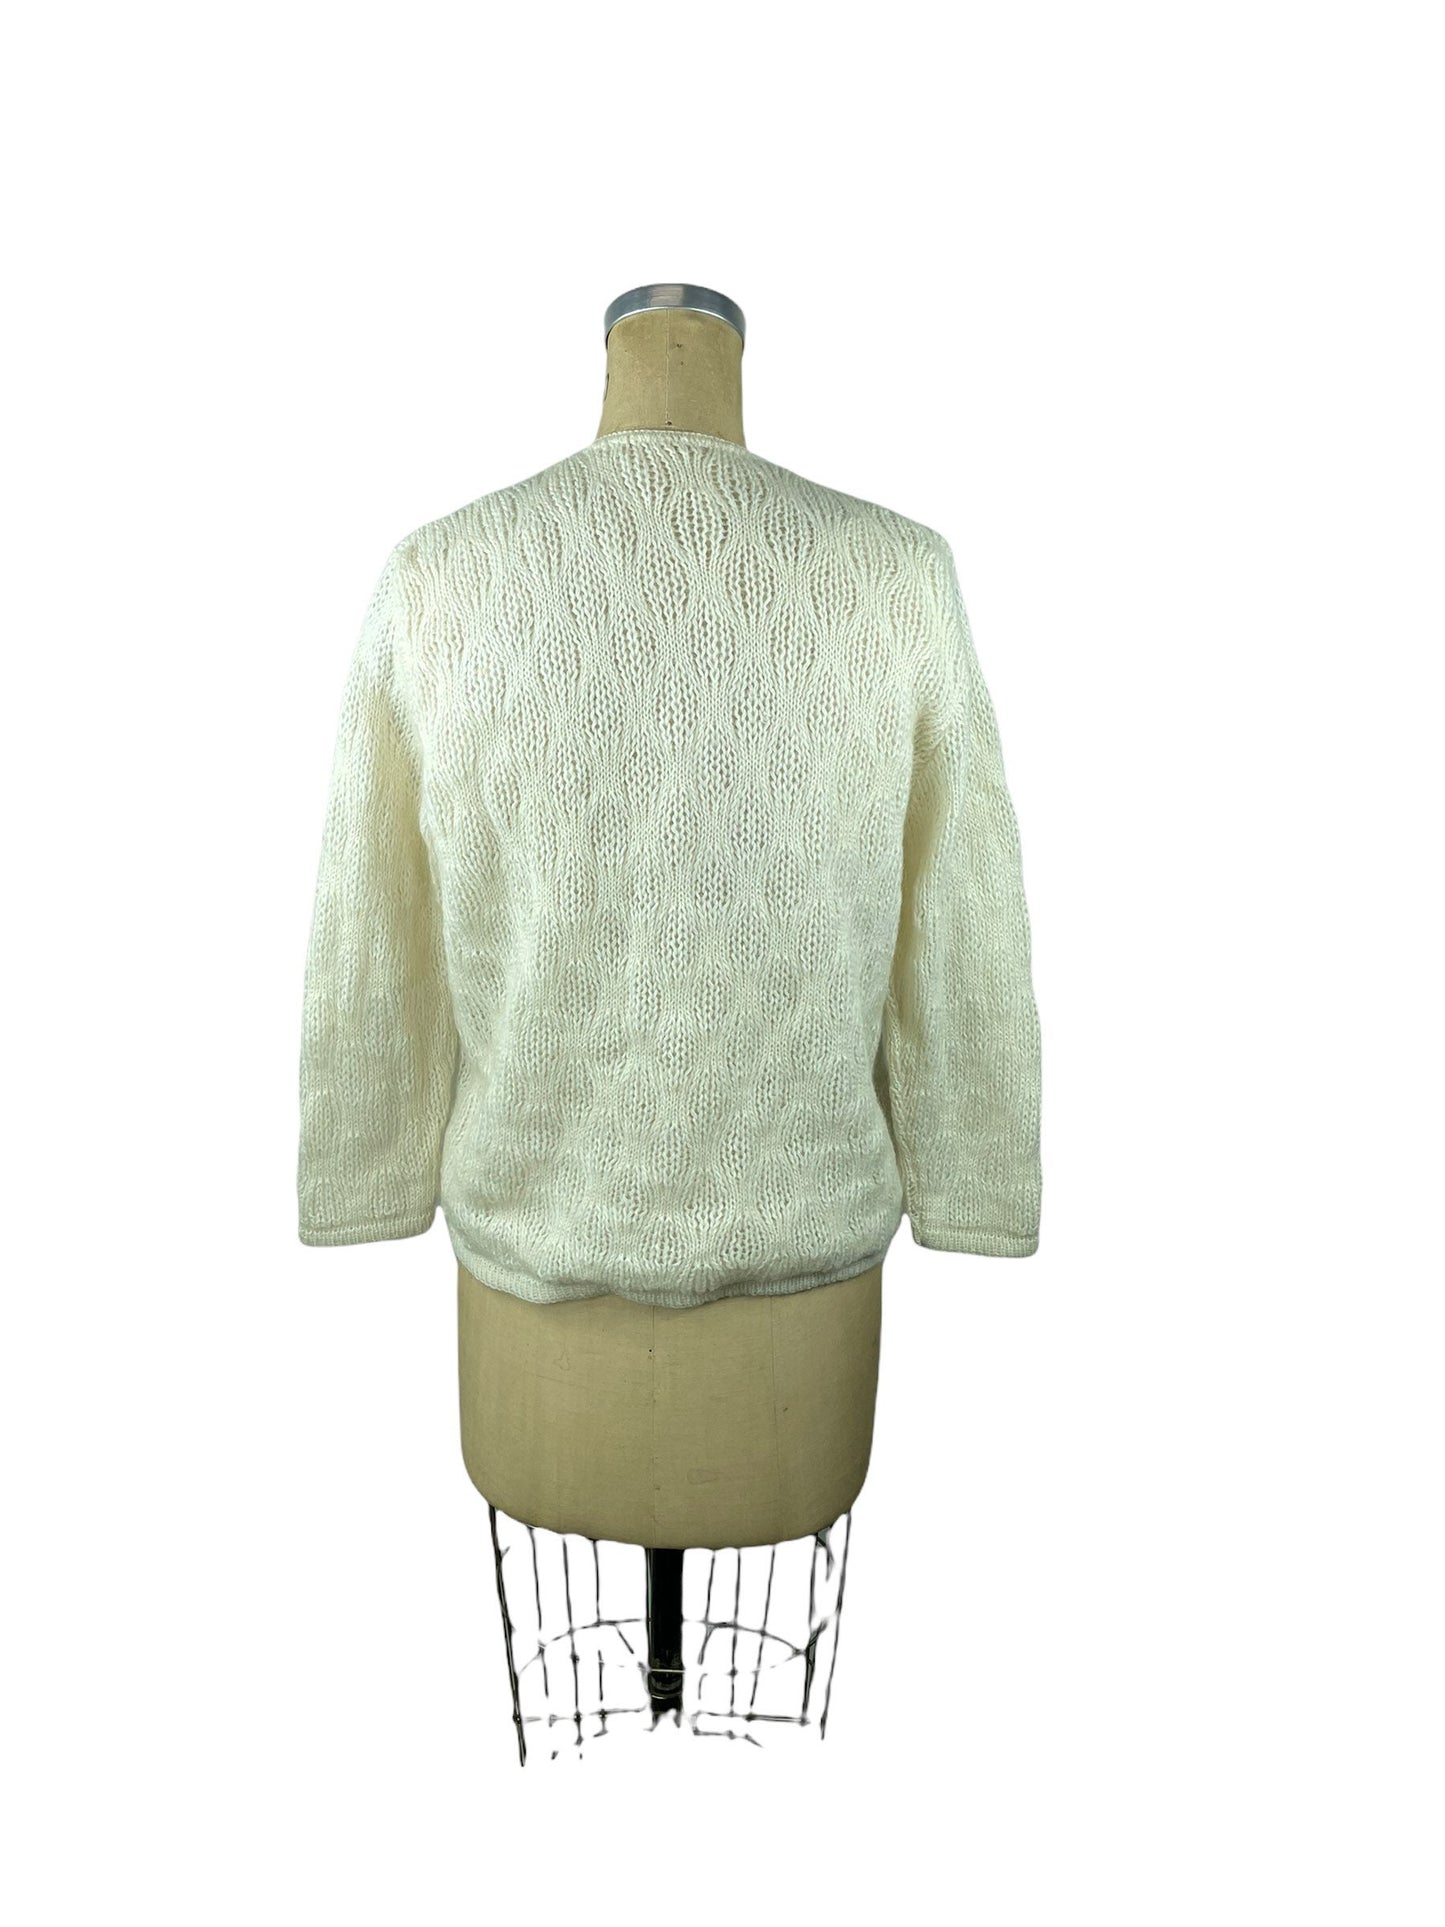 1960s white mohair cardigan sweater pointelle knit Size M/L